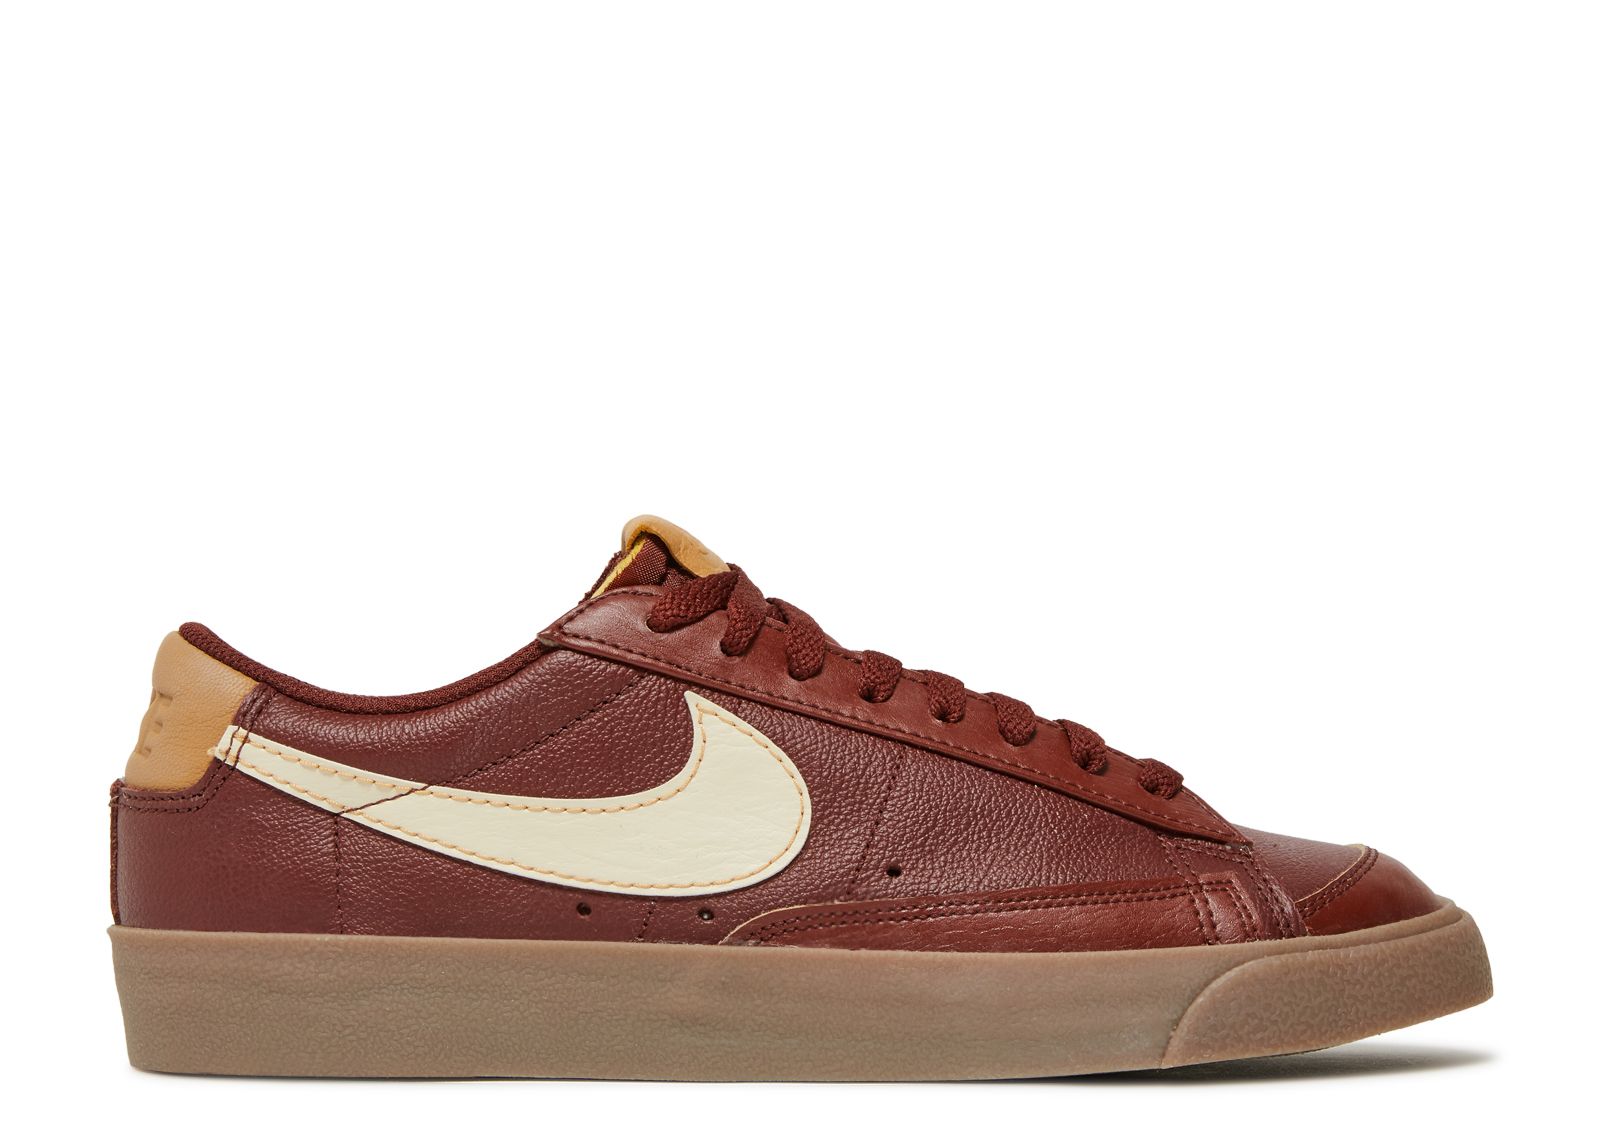 Blazer Low '77 EMB 'Inspected By Swoosh' - Nike - DQ7670 200